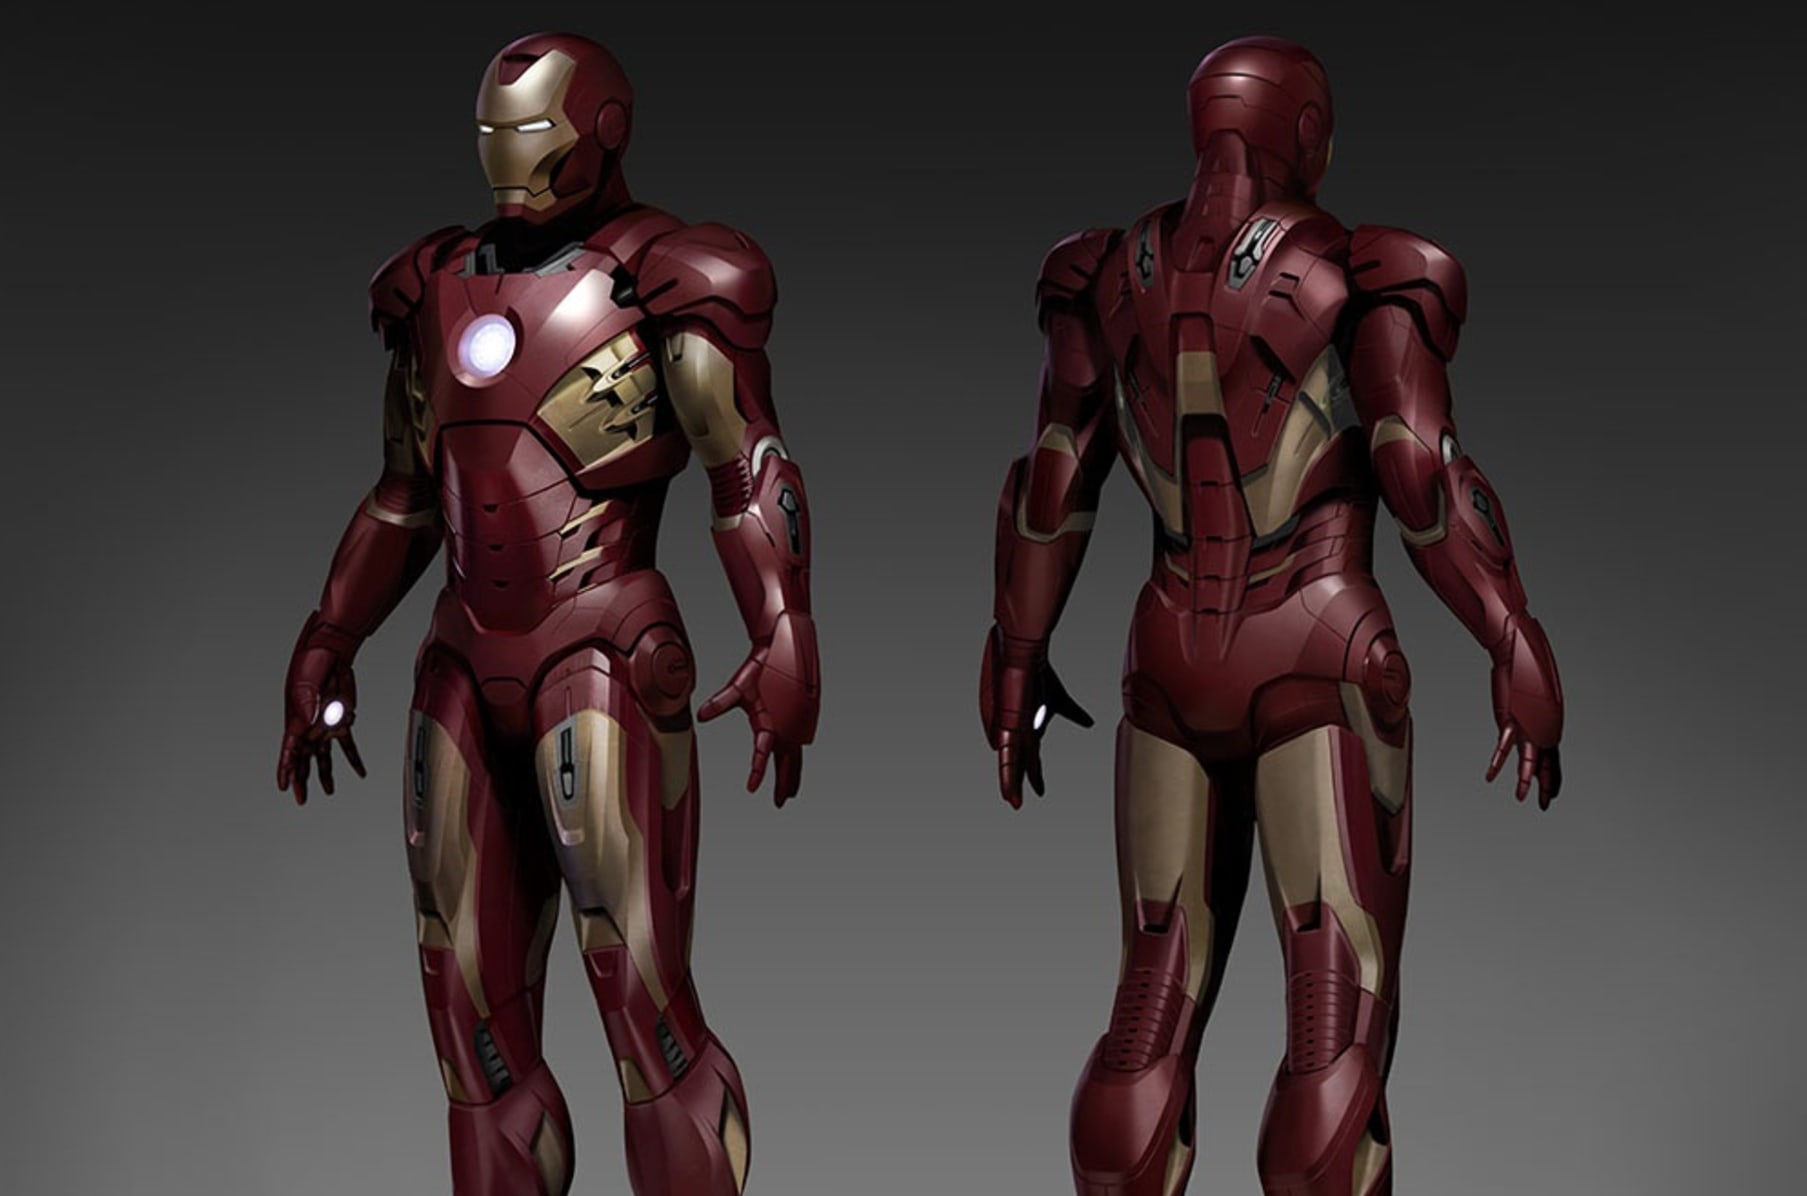 Open Source Iron Man armor project   Indiegogo